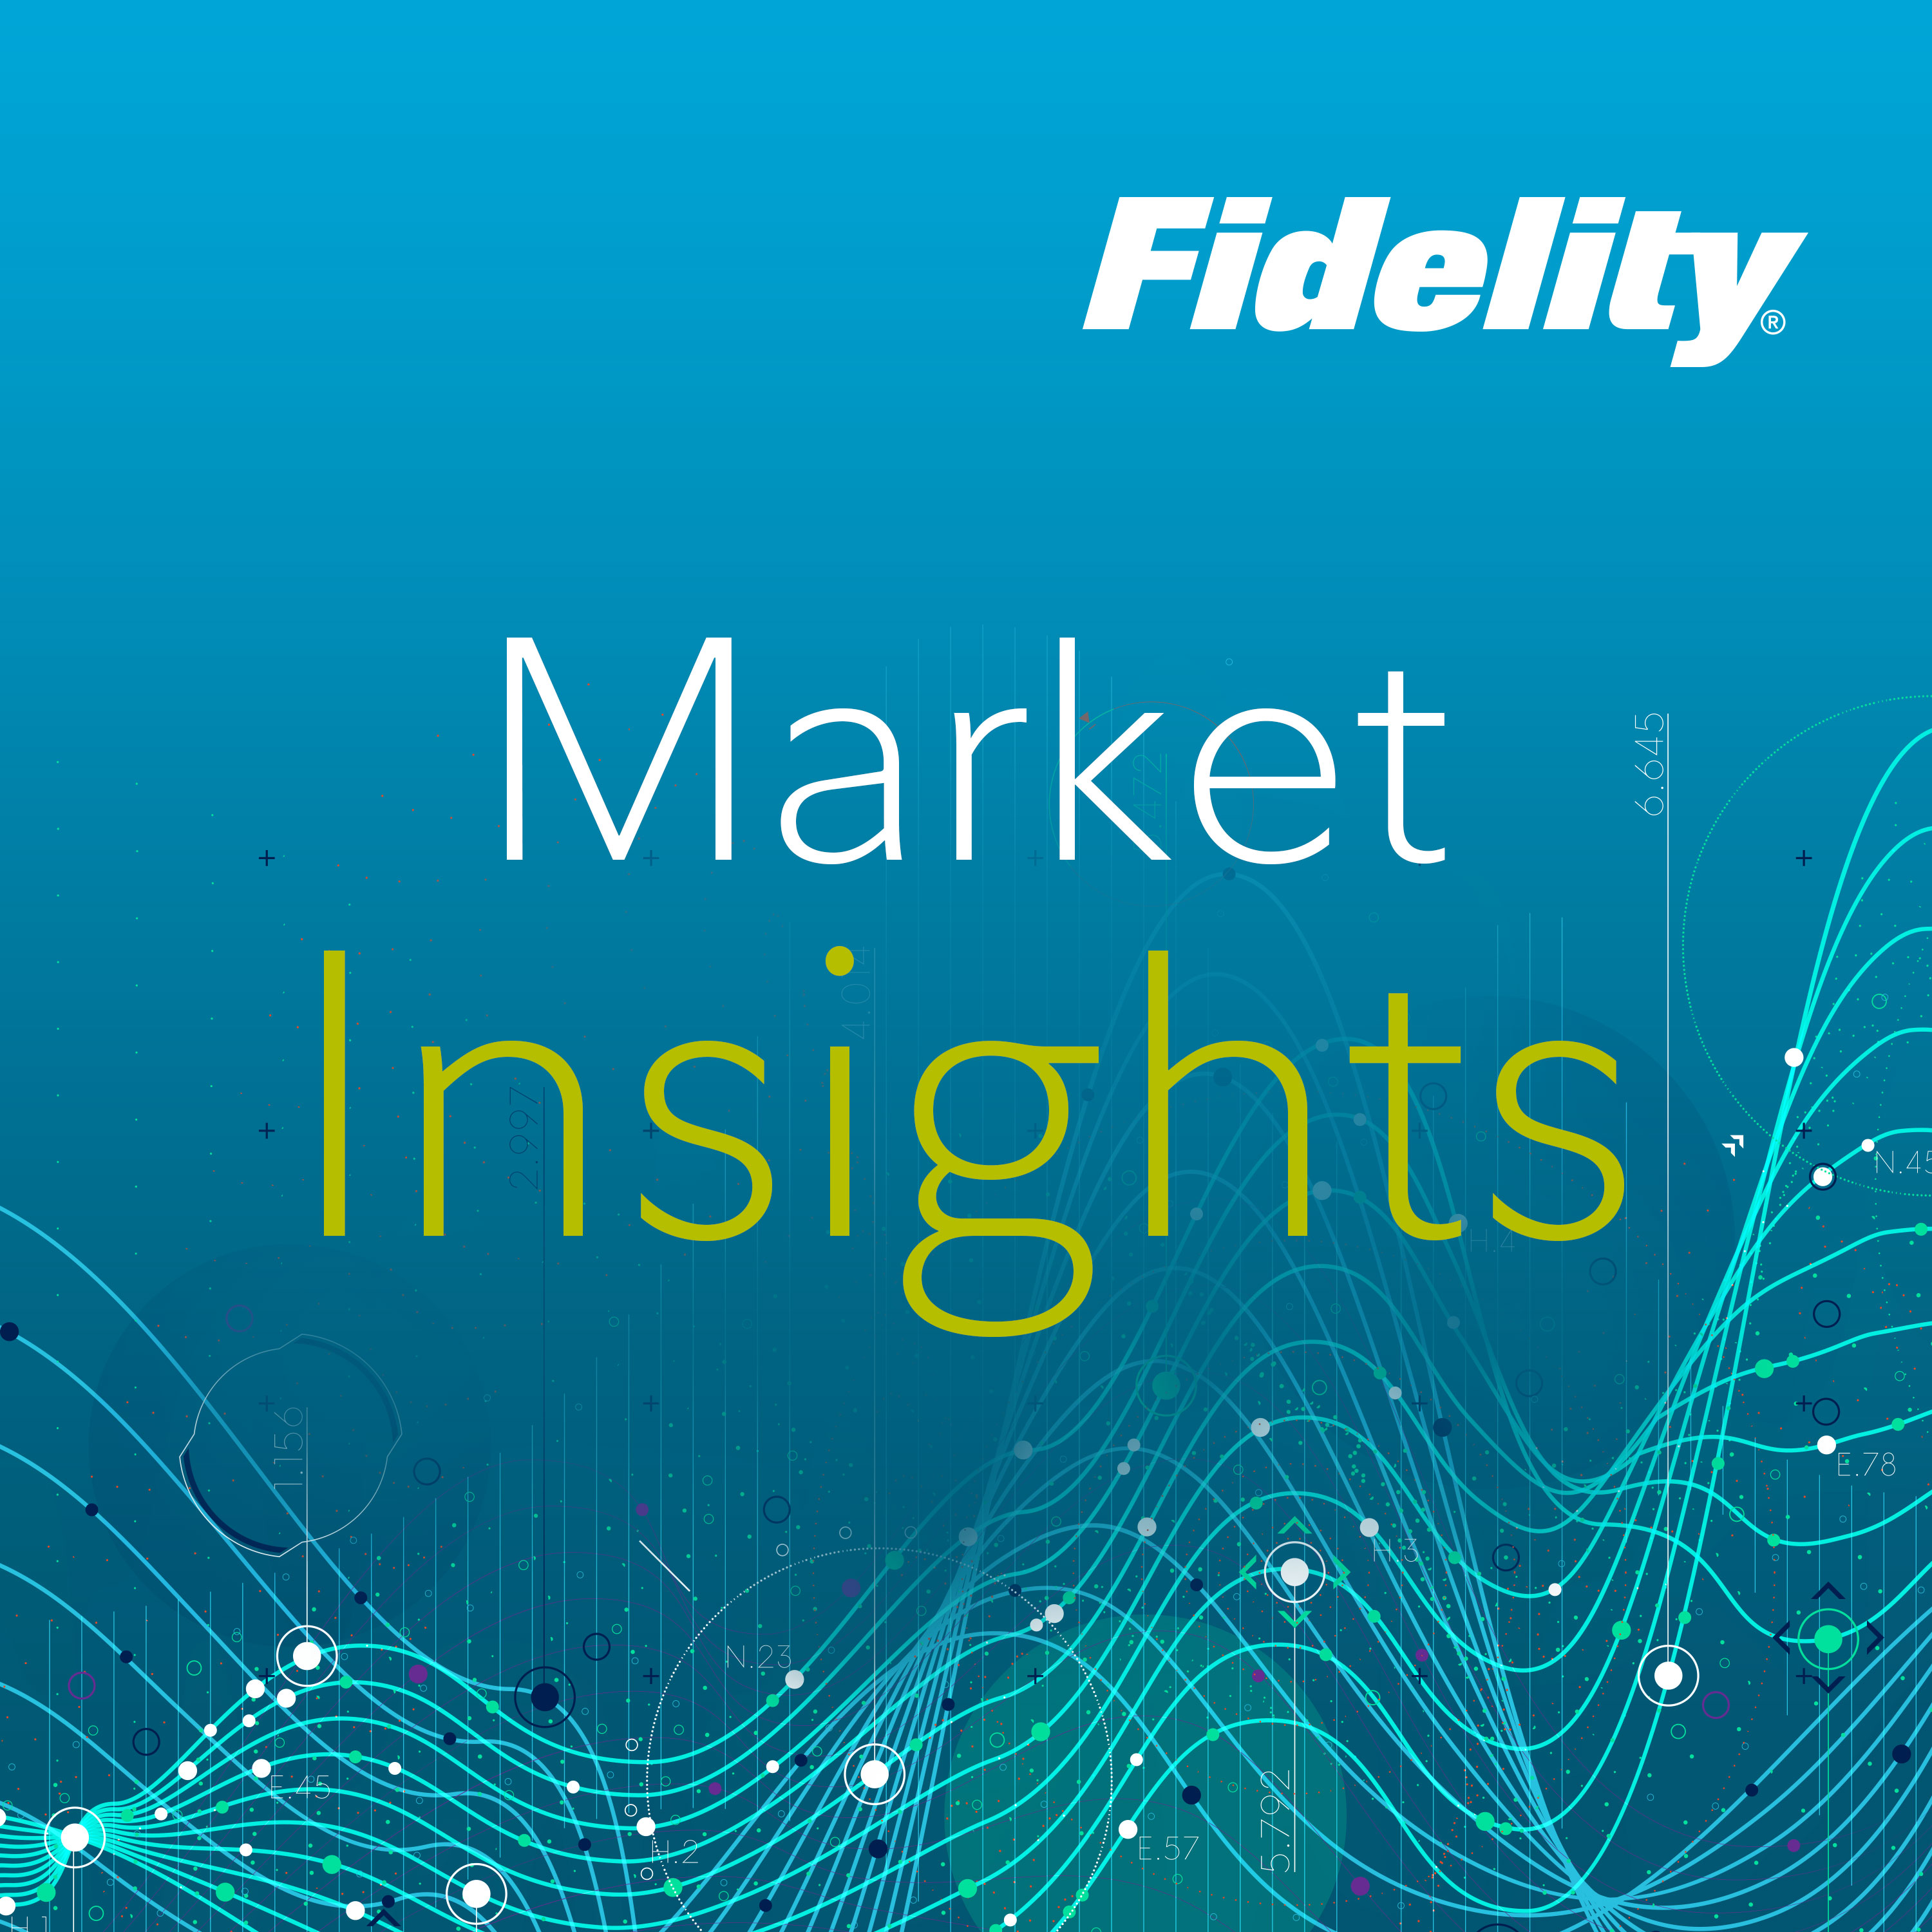 Market Insights: A look into earnings growth and the international markets